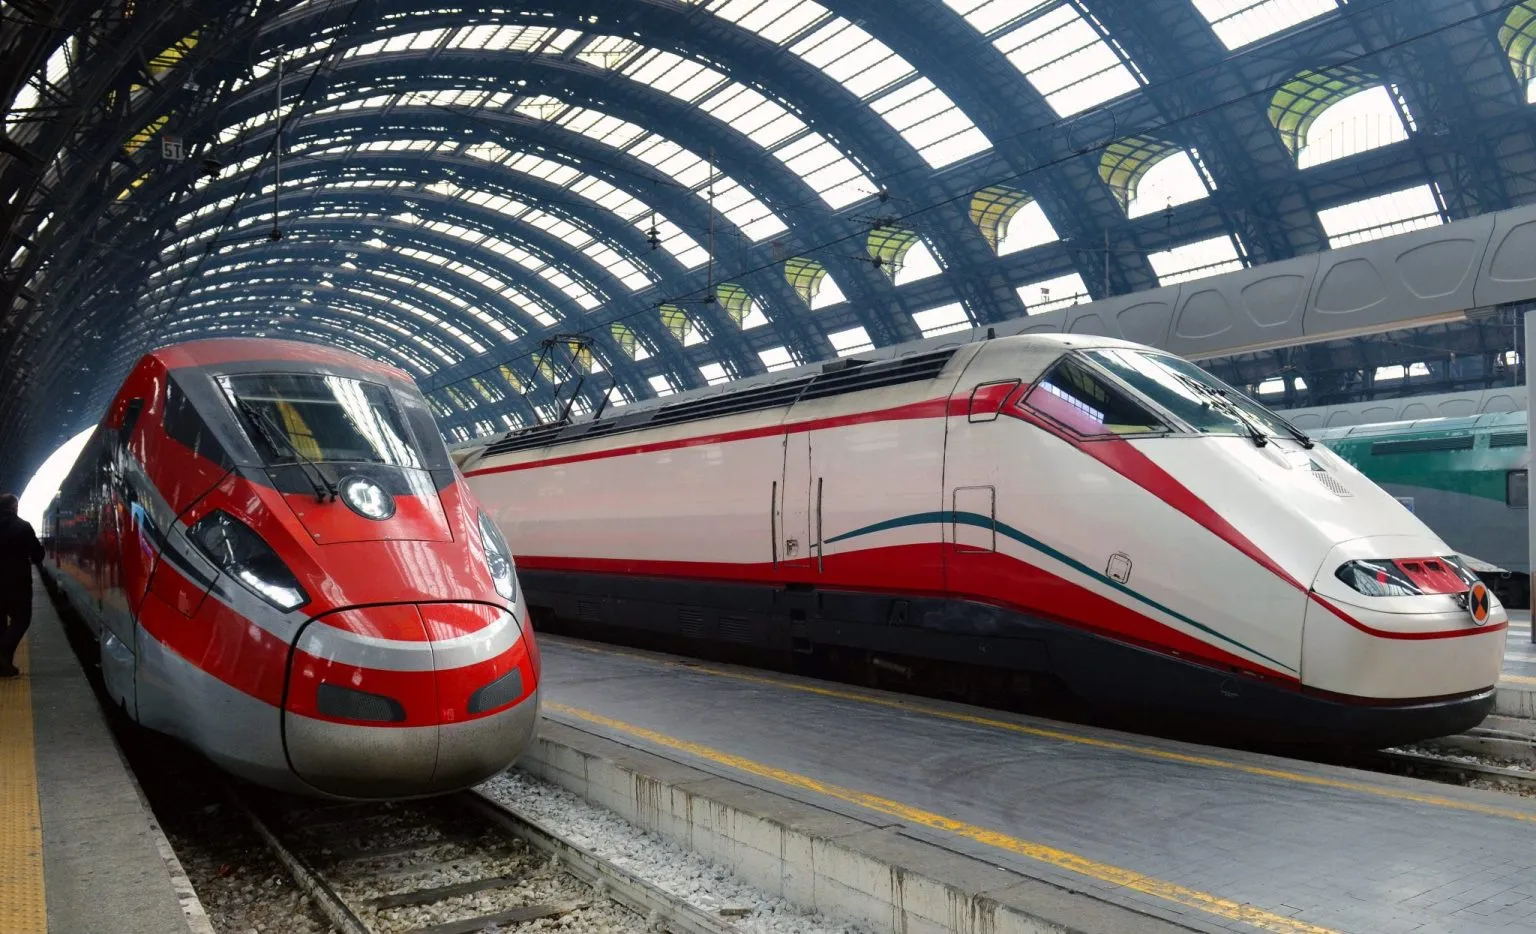 cheapest way to travel europe by train